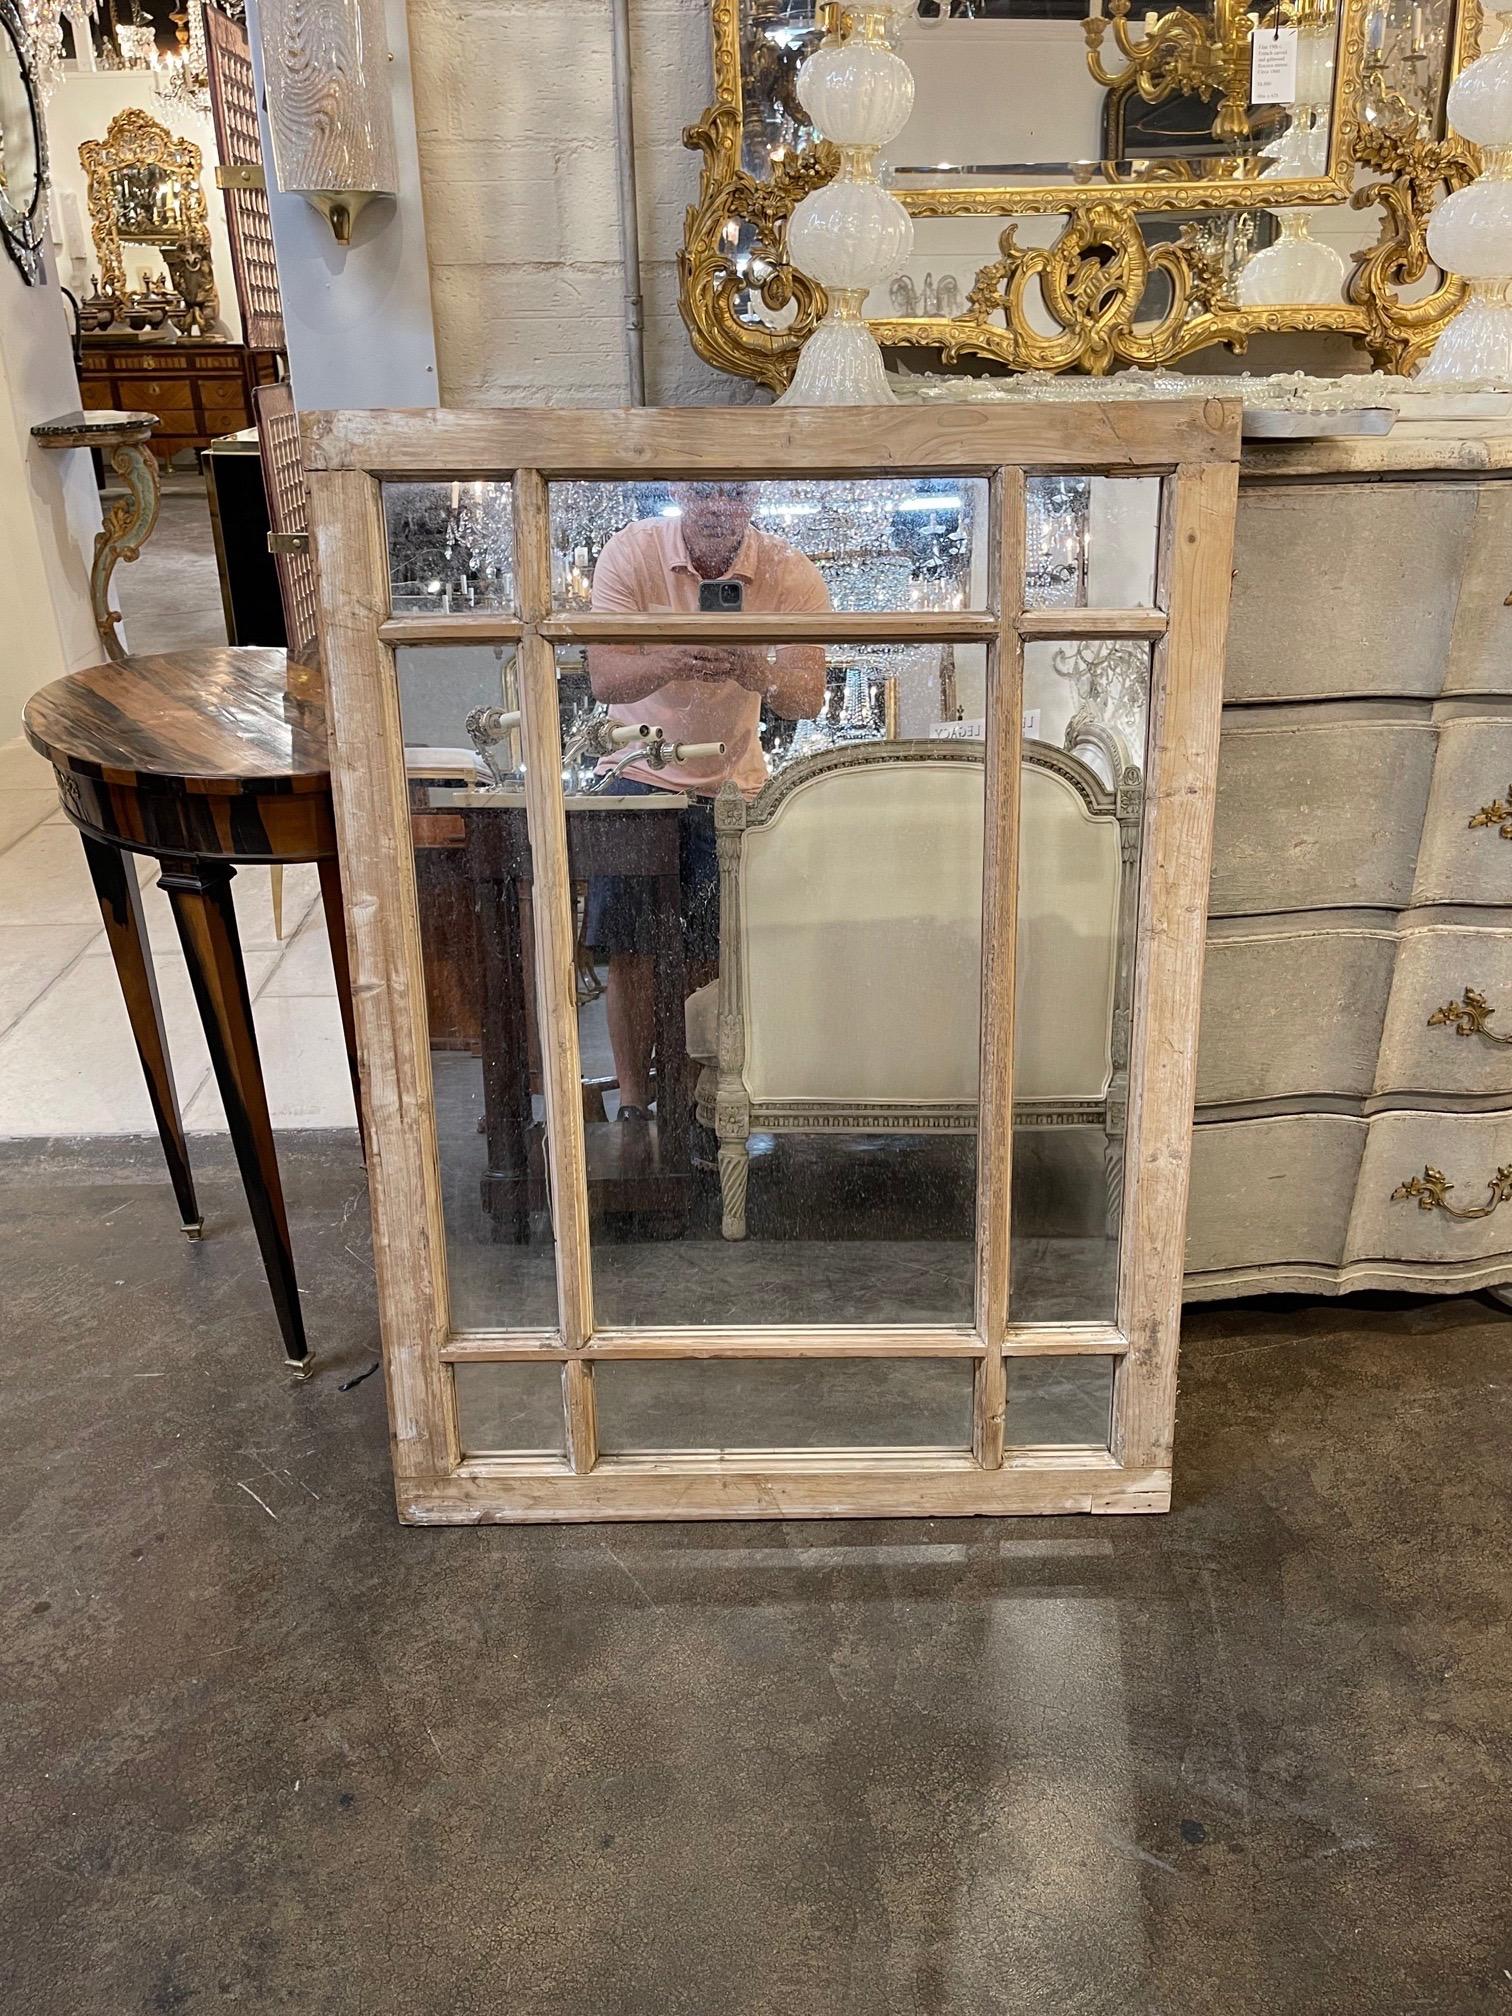 Handsome pair of French stripped pine and gesso paneled mirrors made from antique moldings. Great for the modern farmhouse look. Note: Price listed is per item.